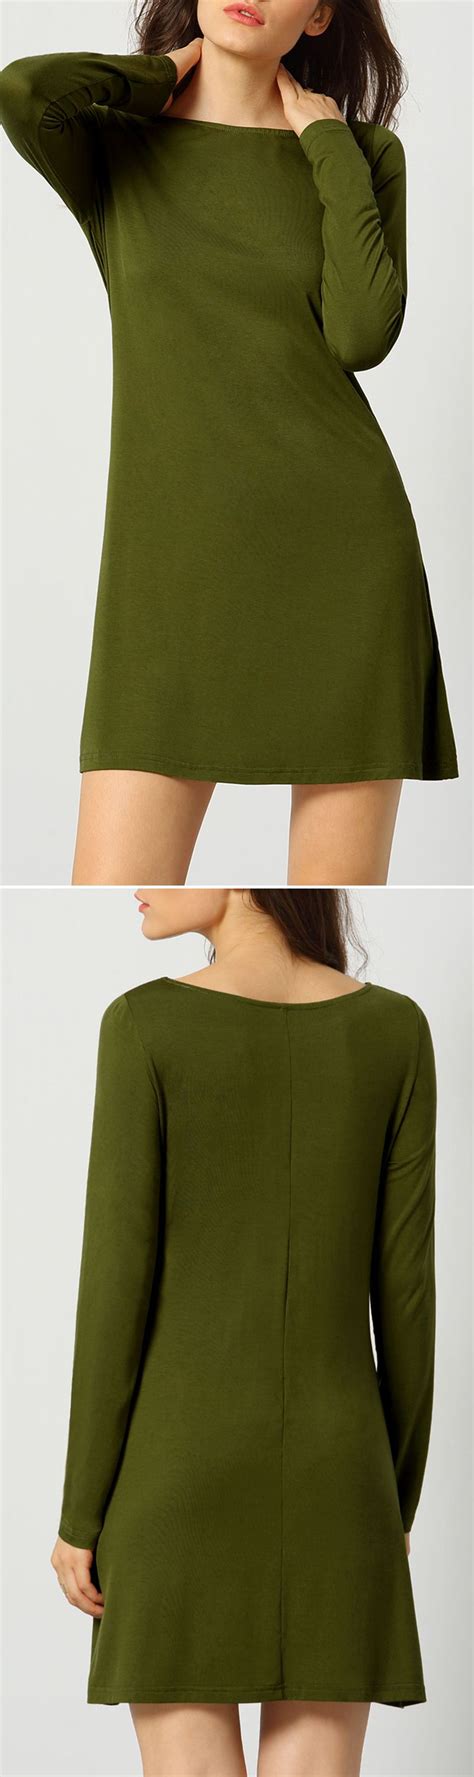 Army Green Long Sleeve Designers Casual Dress Dress P Dress Outfits Long Sleeve Casual Dress